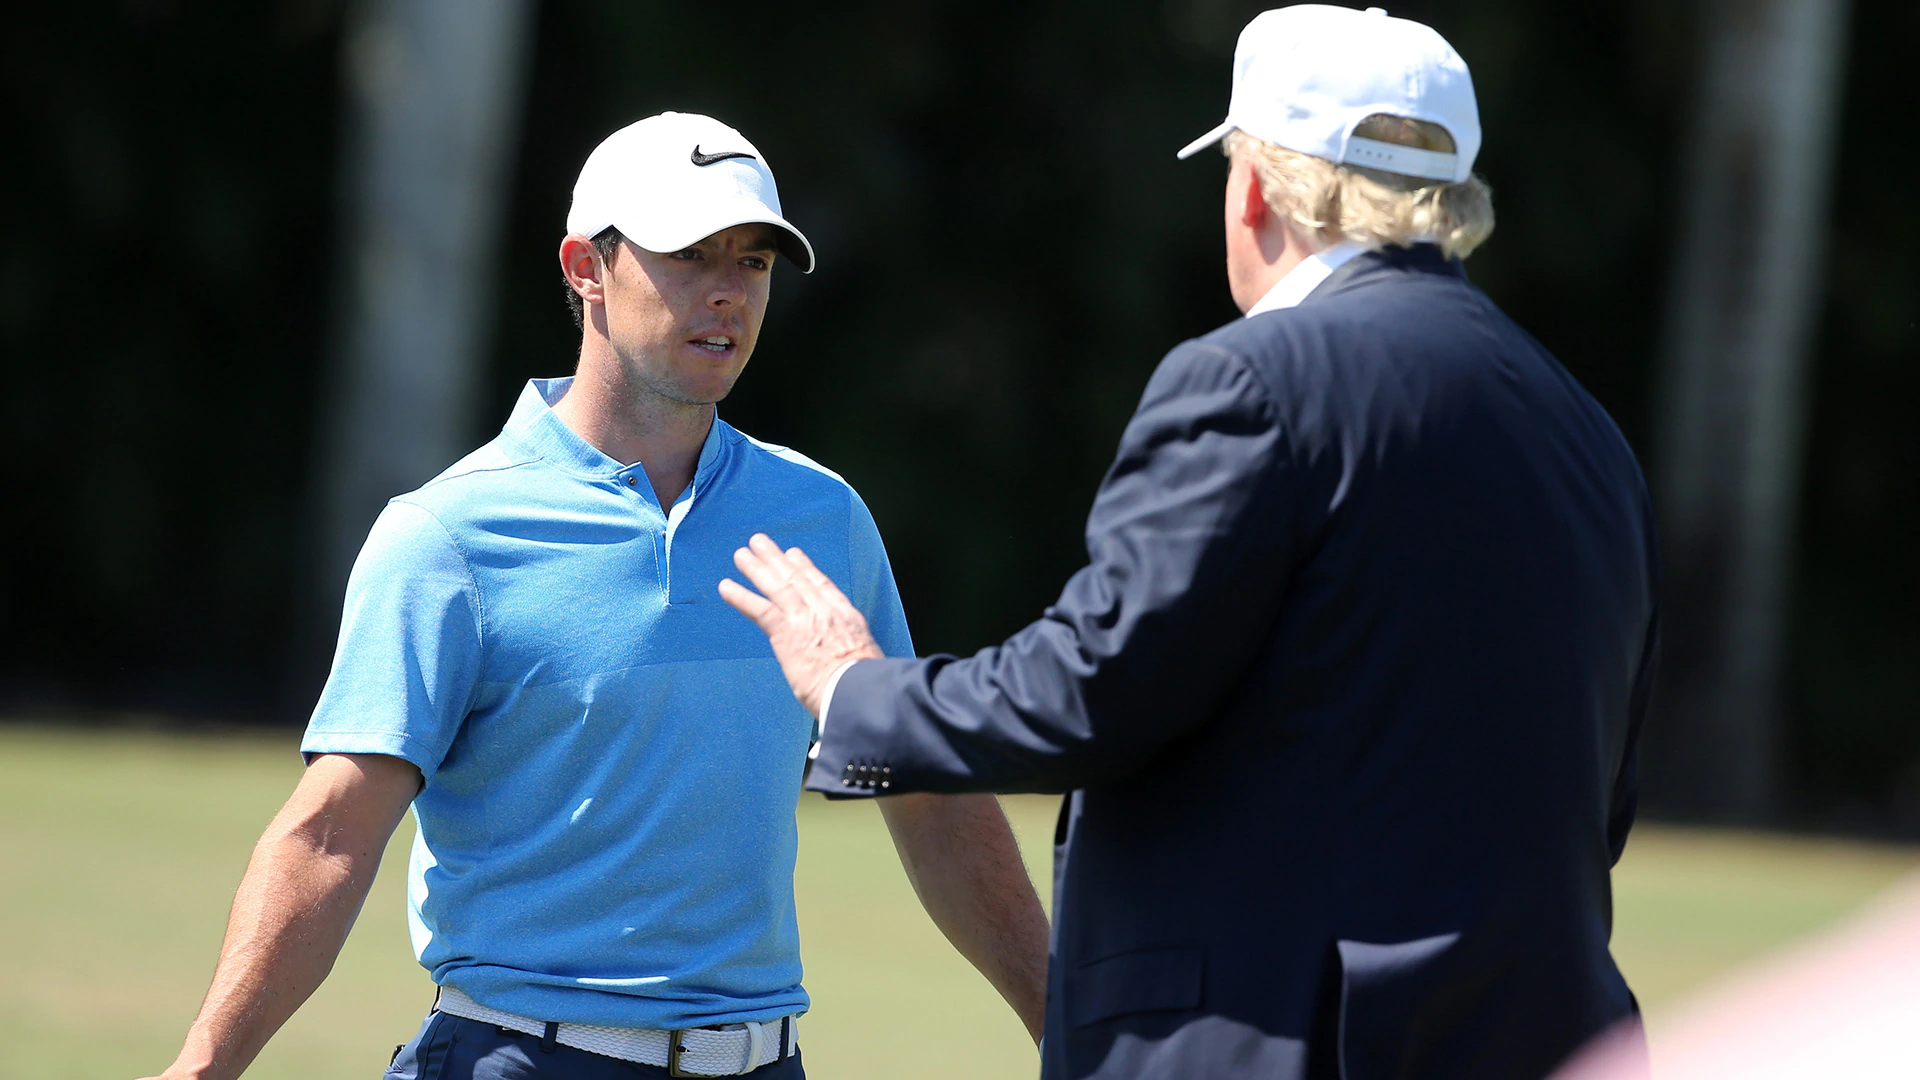 Rory McIlroy on Donald Trump’s COVID response: ‘Not the way a leader should act’